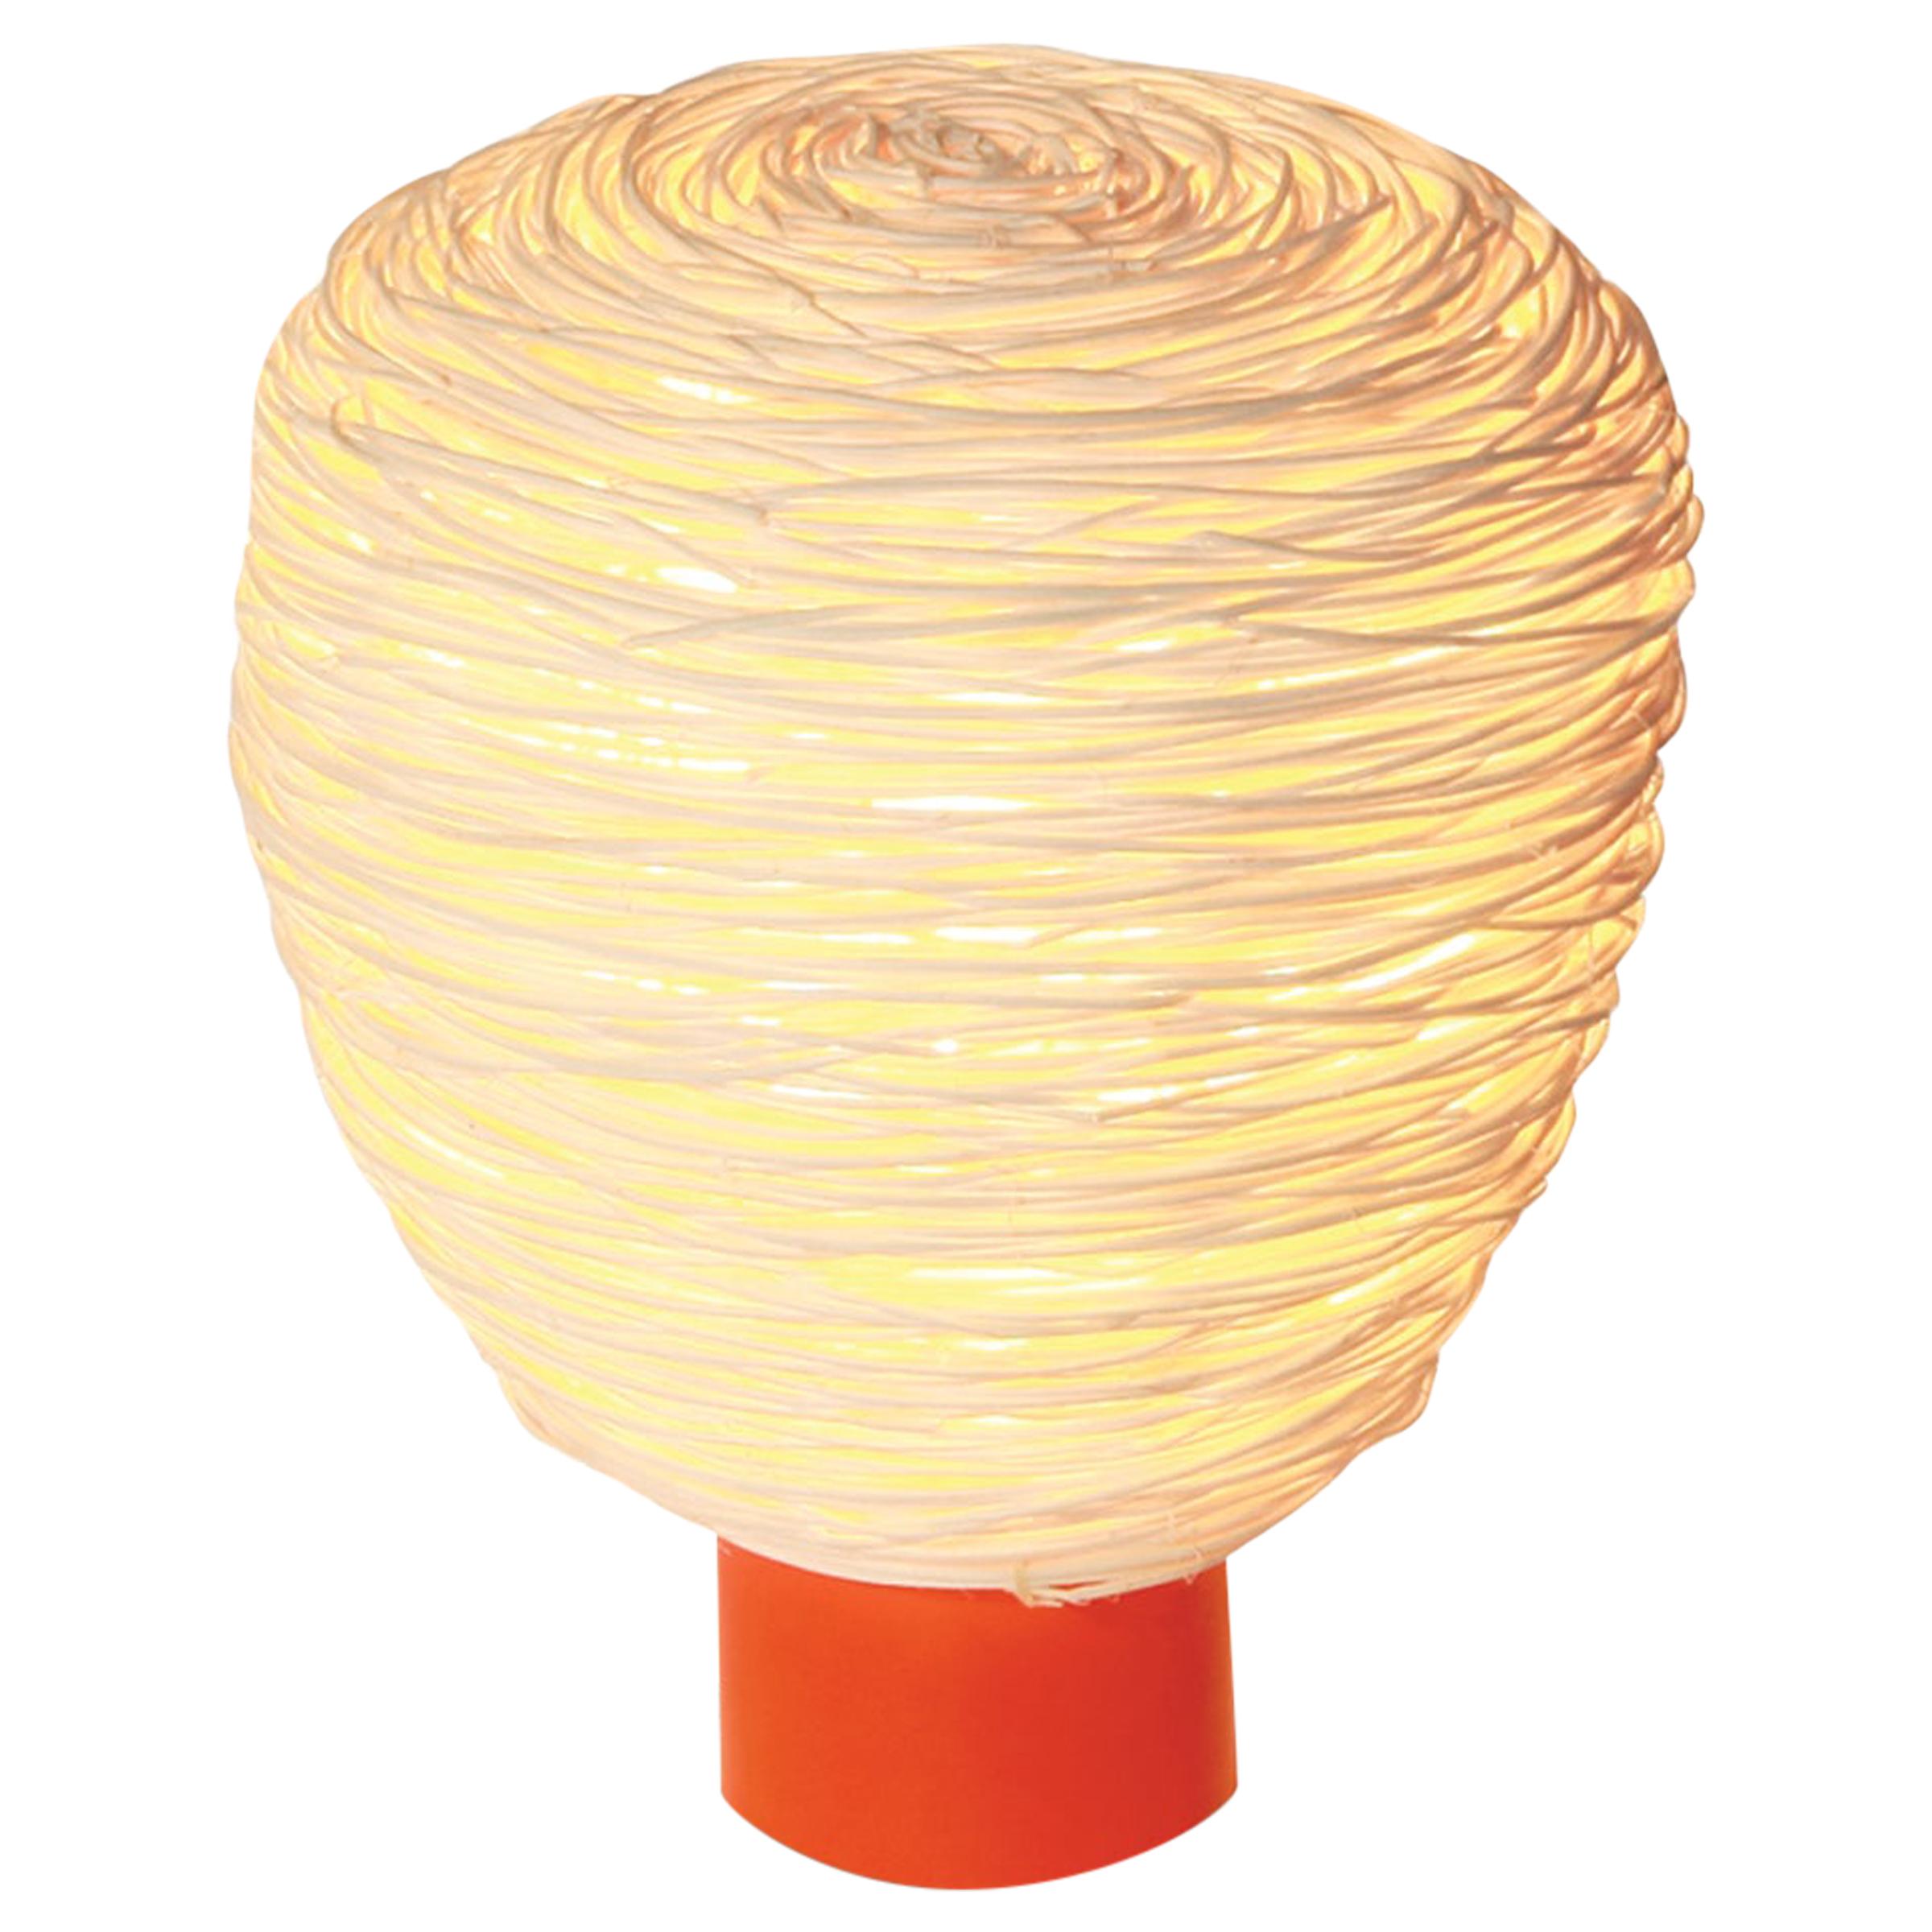 Unit Boy Table Lamps, Stylish Modern Rattan Handcrafted Light created by Ango